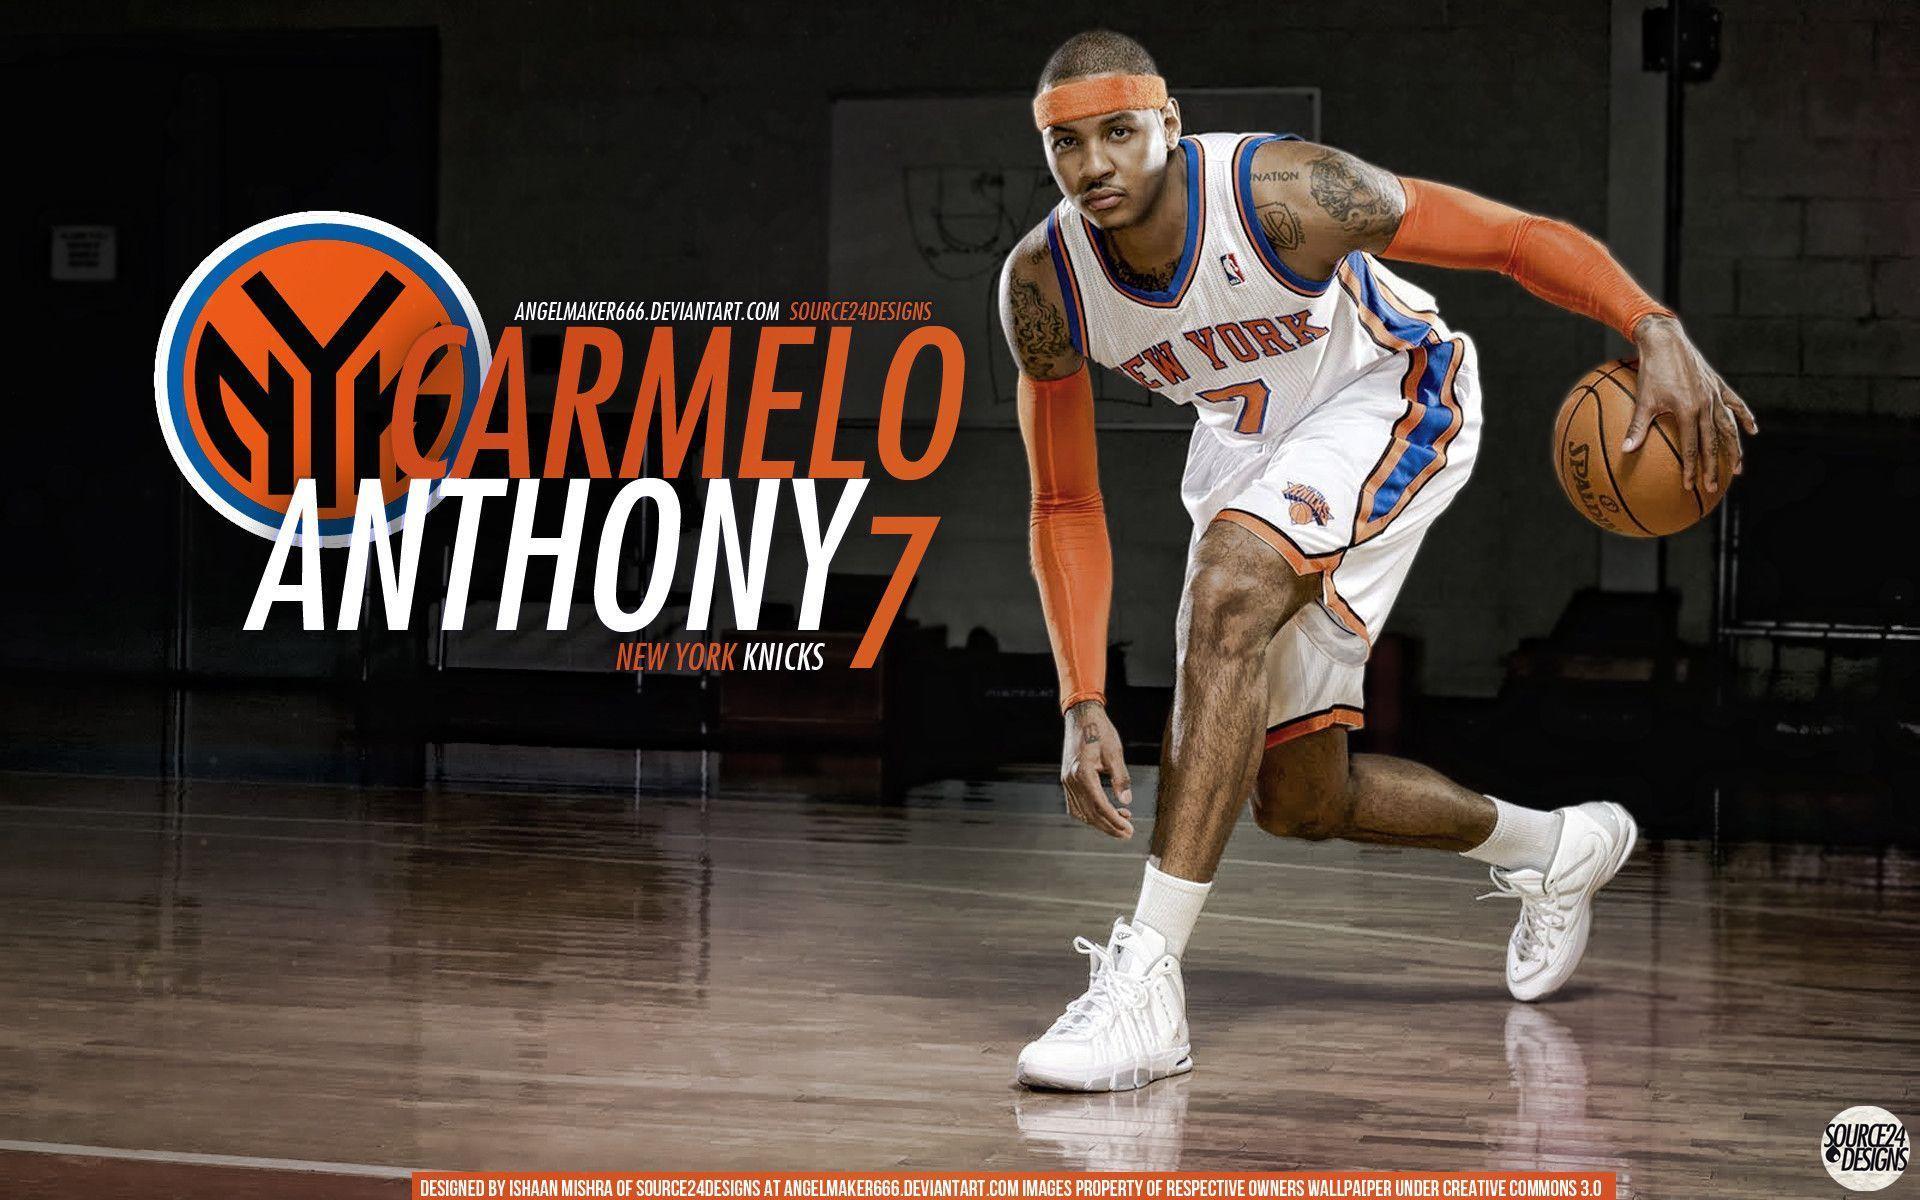 New York Knicks Carmelo Anthony - Mobile Abyss